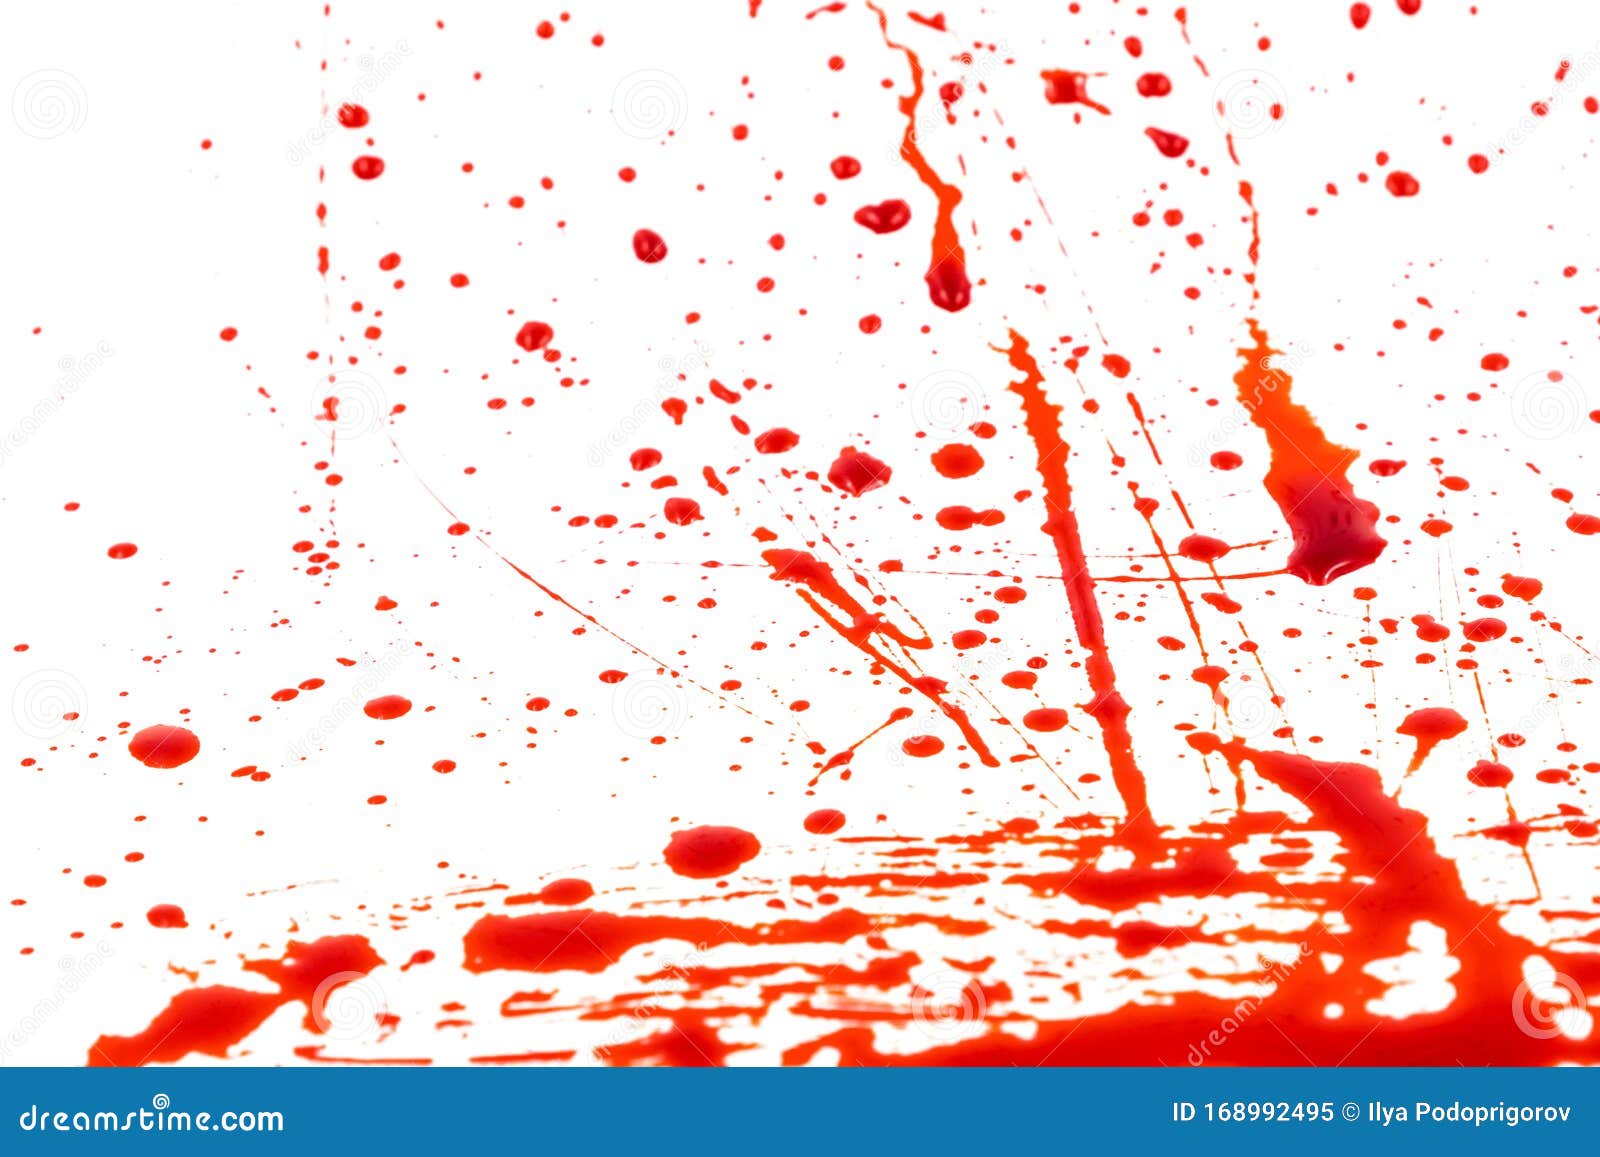 Bloody Splashes and Drops on a White Background. Dripping and Following Red  Blood Paint Stock Image - Image of drop, horror: 168992495